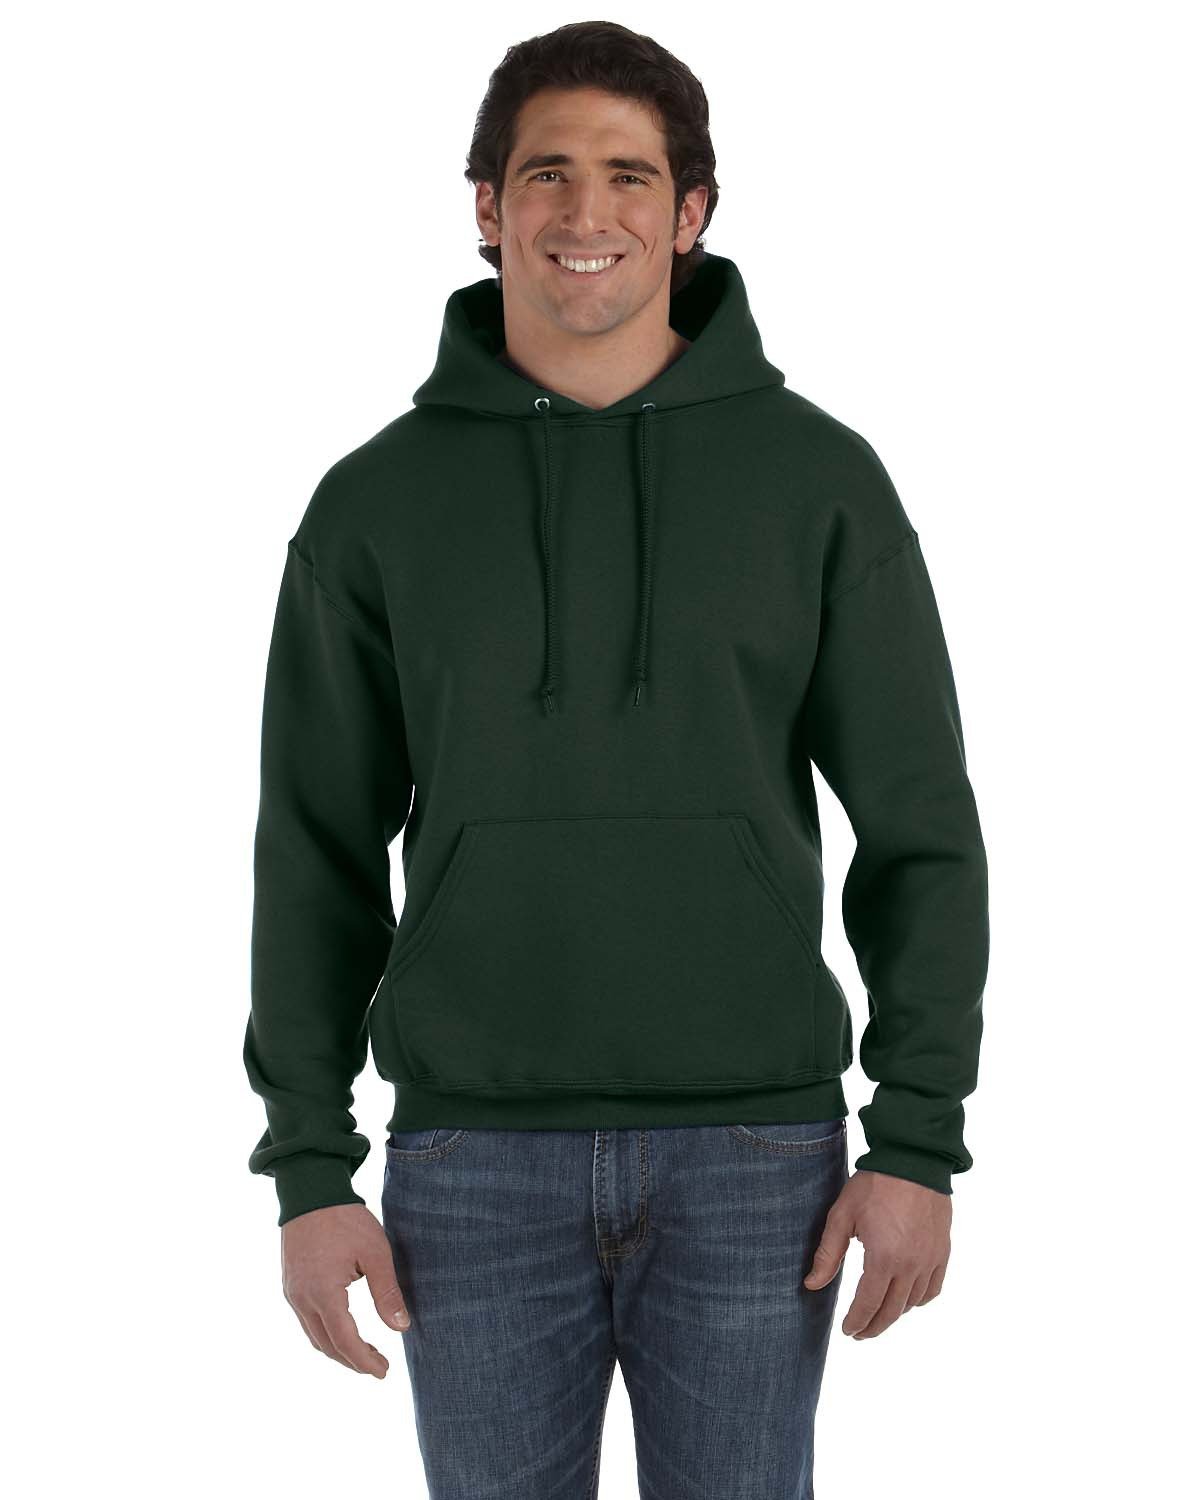 Fruit of the Loom Adult Supercotton™ Pullover Hooded Sweatshirt FOREST GREEN 